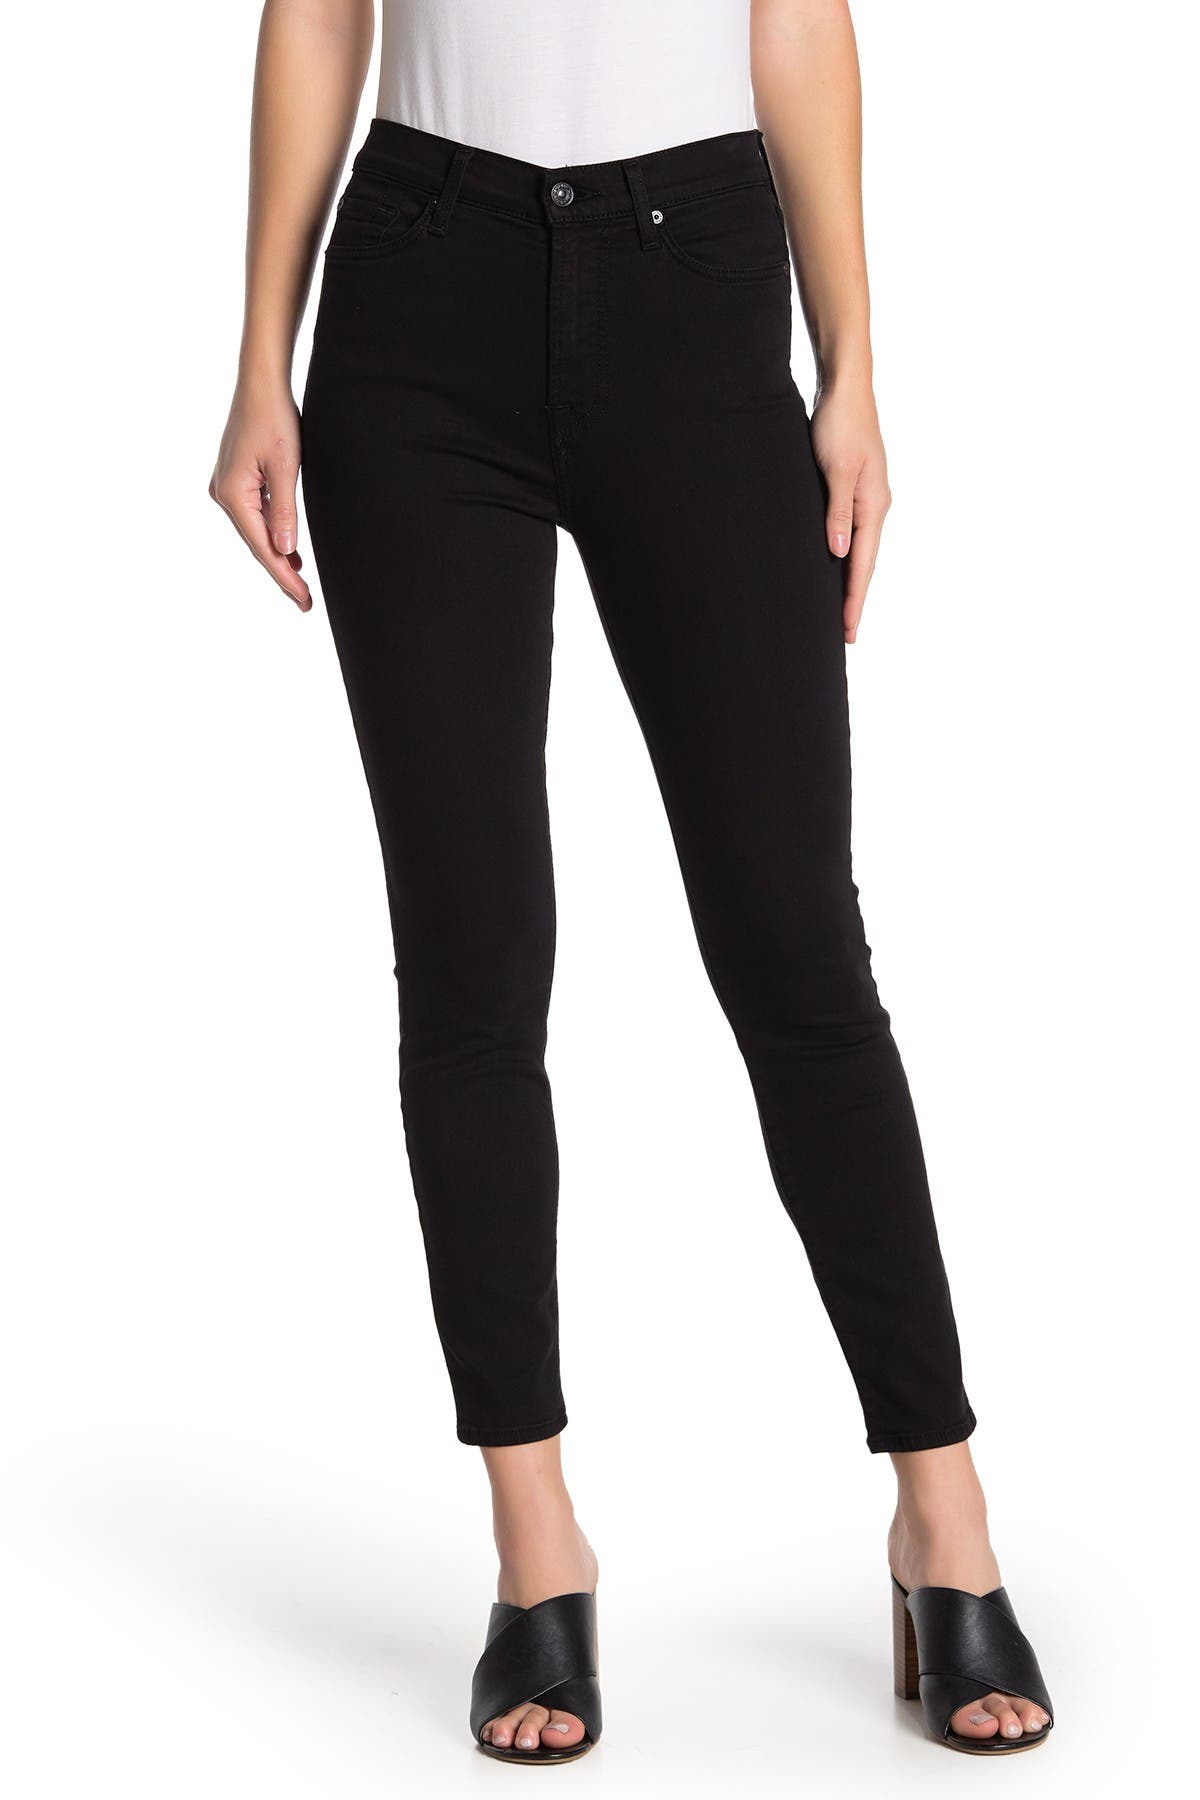 7 for all mankind cropped skinny jeans